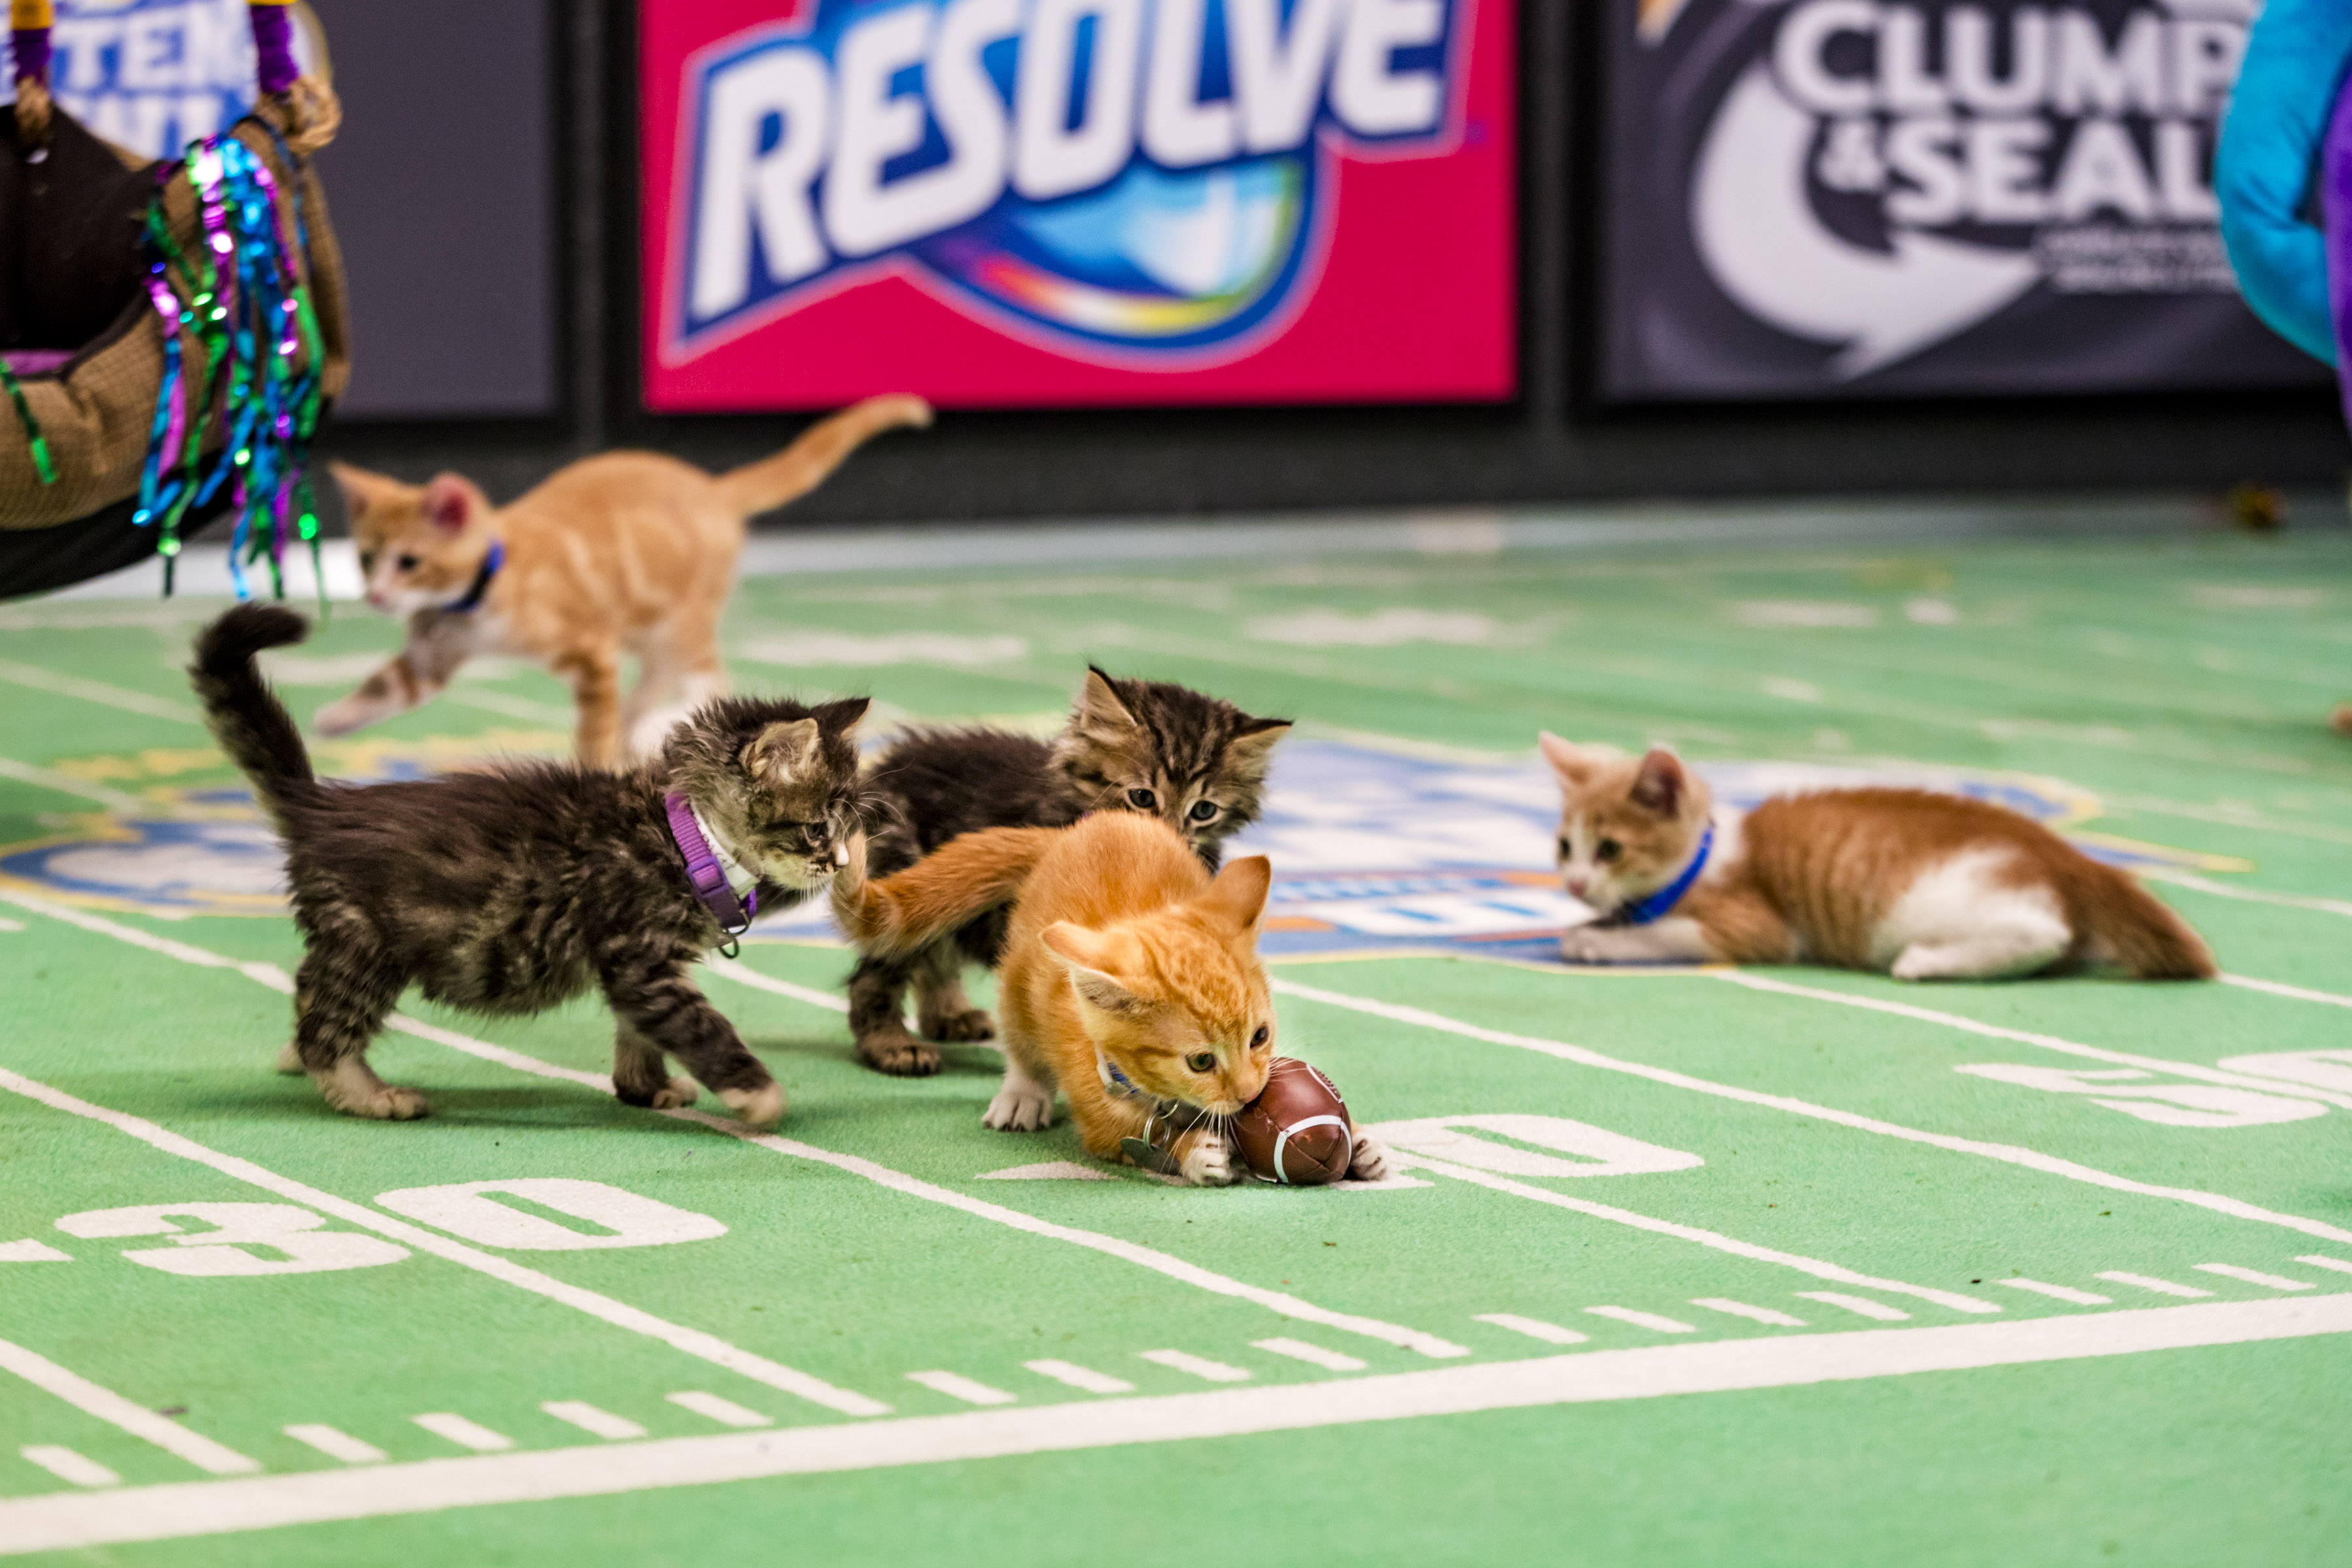 The Kitten Bowl III is Back Football + Kittens = ADORABLE! OurKidsMom